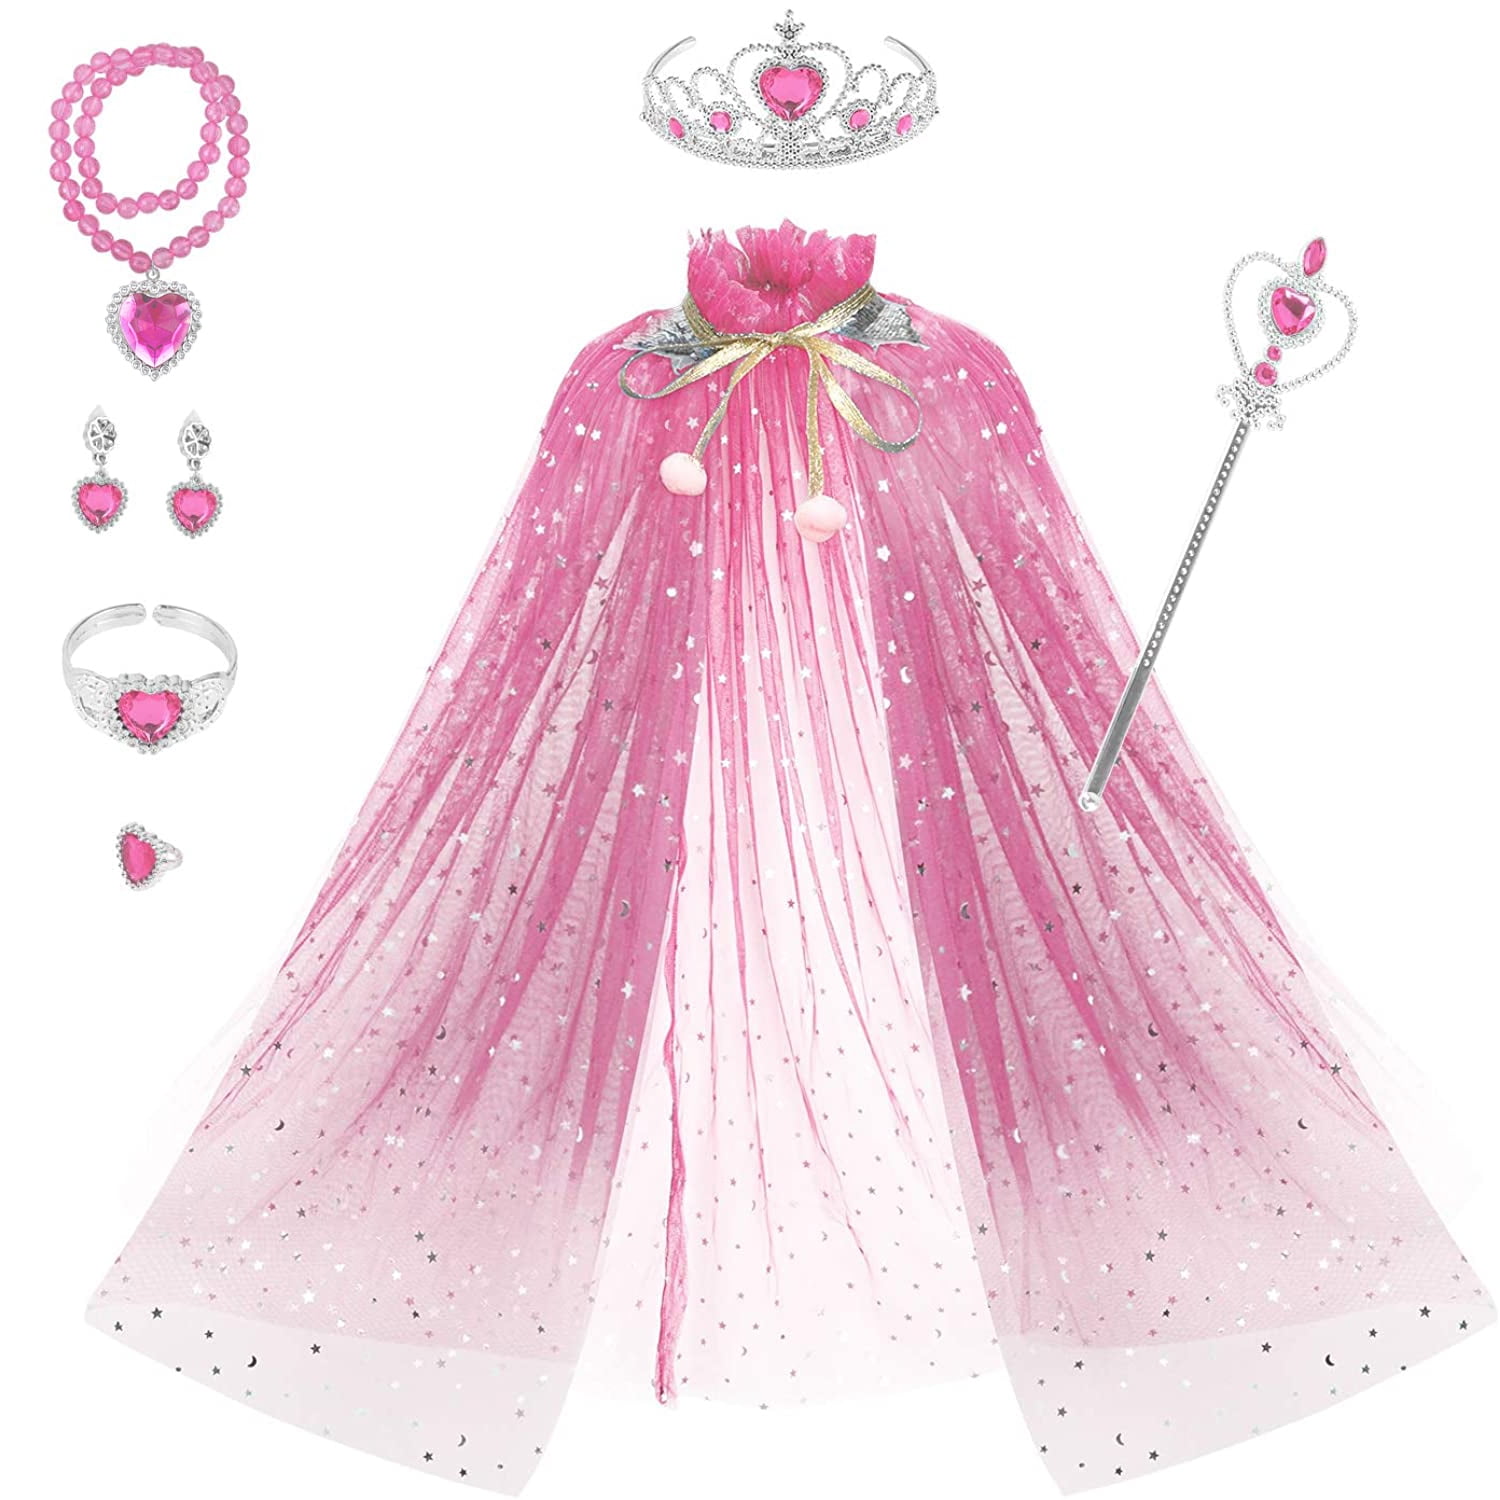 Includes 4 Toyvelt Princess Dress Up & Play Shoe And Jewelry Boutique 